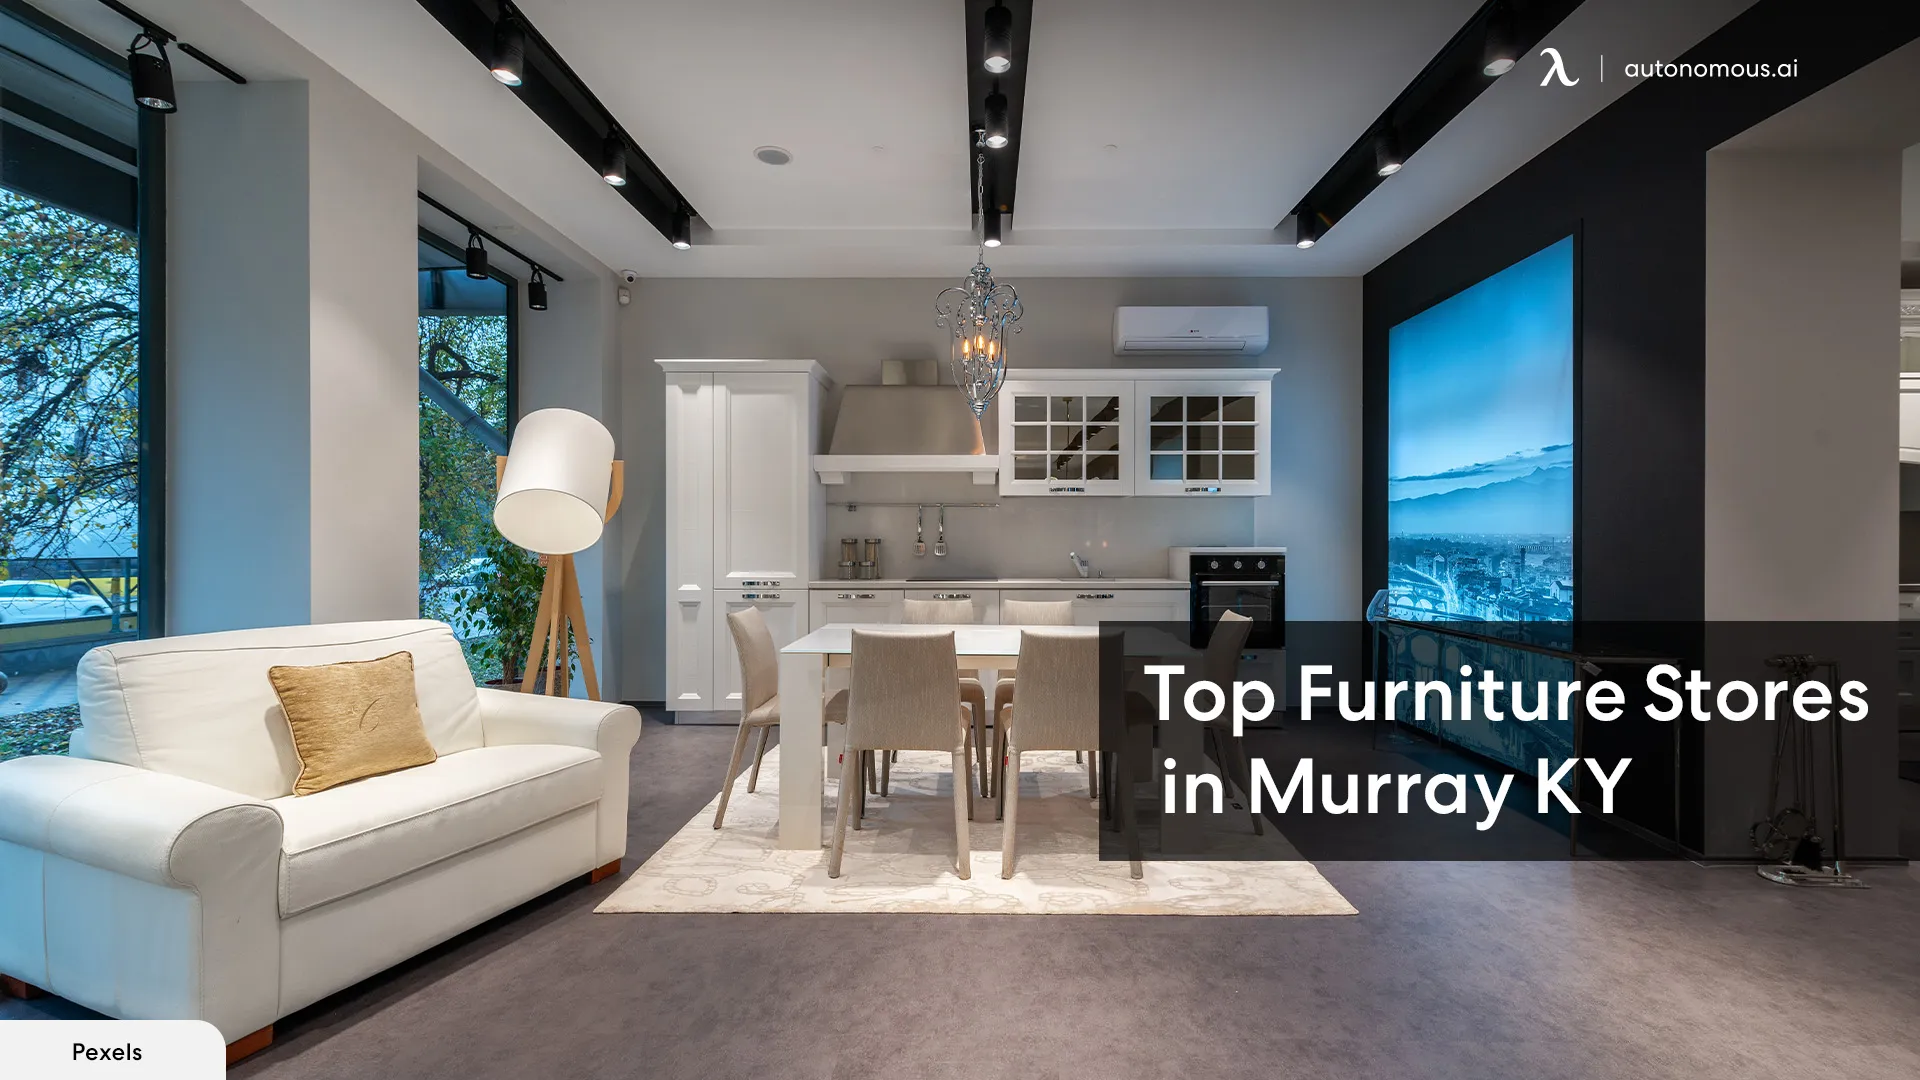 Top 5 Furniture Stores in Murray KY for Home Office